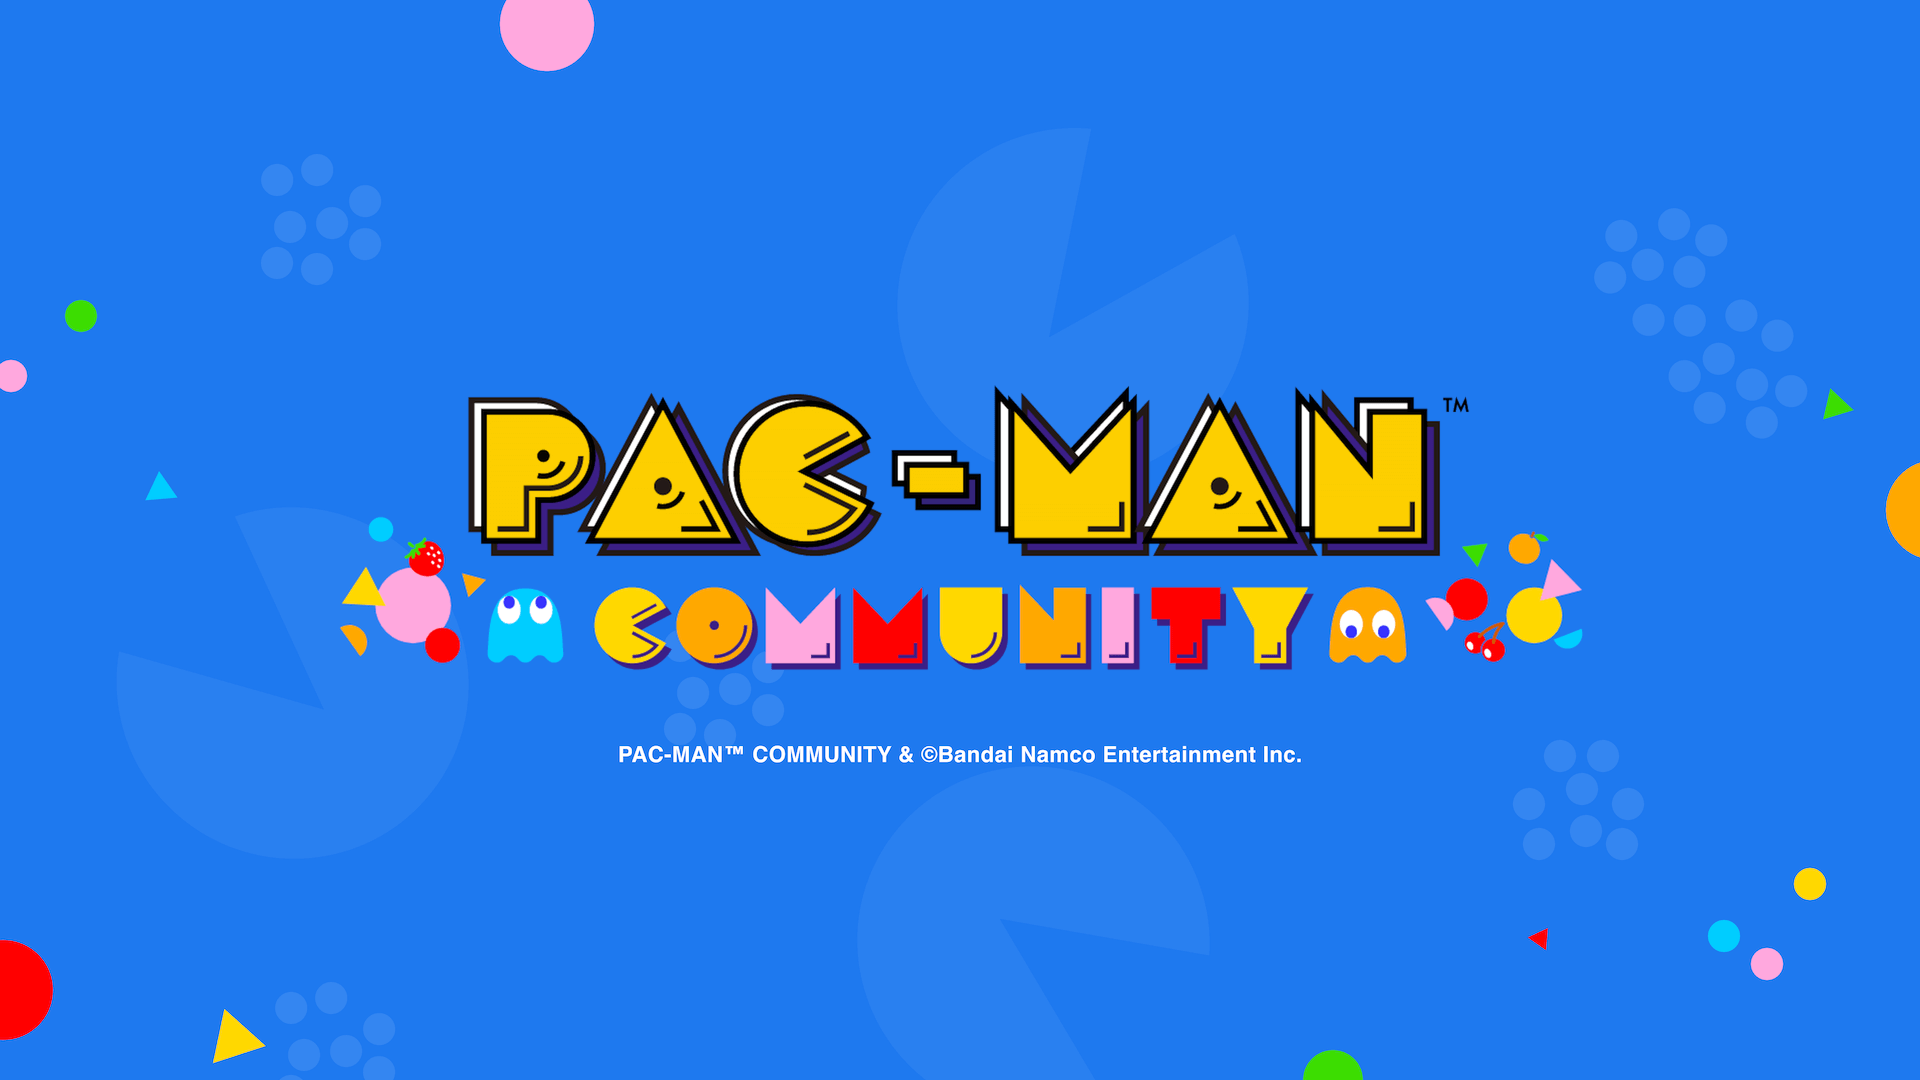 PAC-MAN COMMUNITY adds several experiences to the world-famous game for the first time